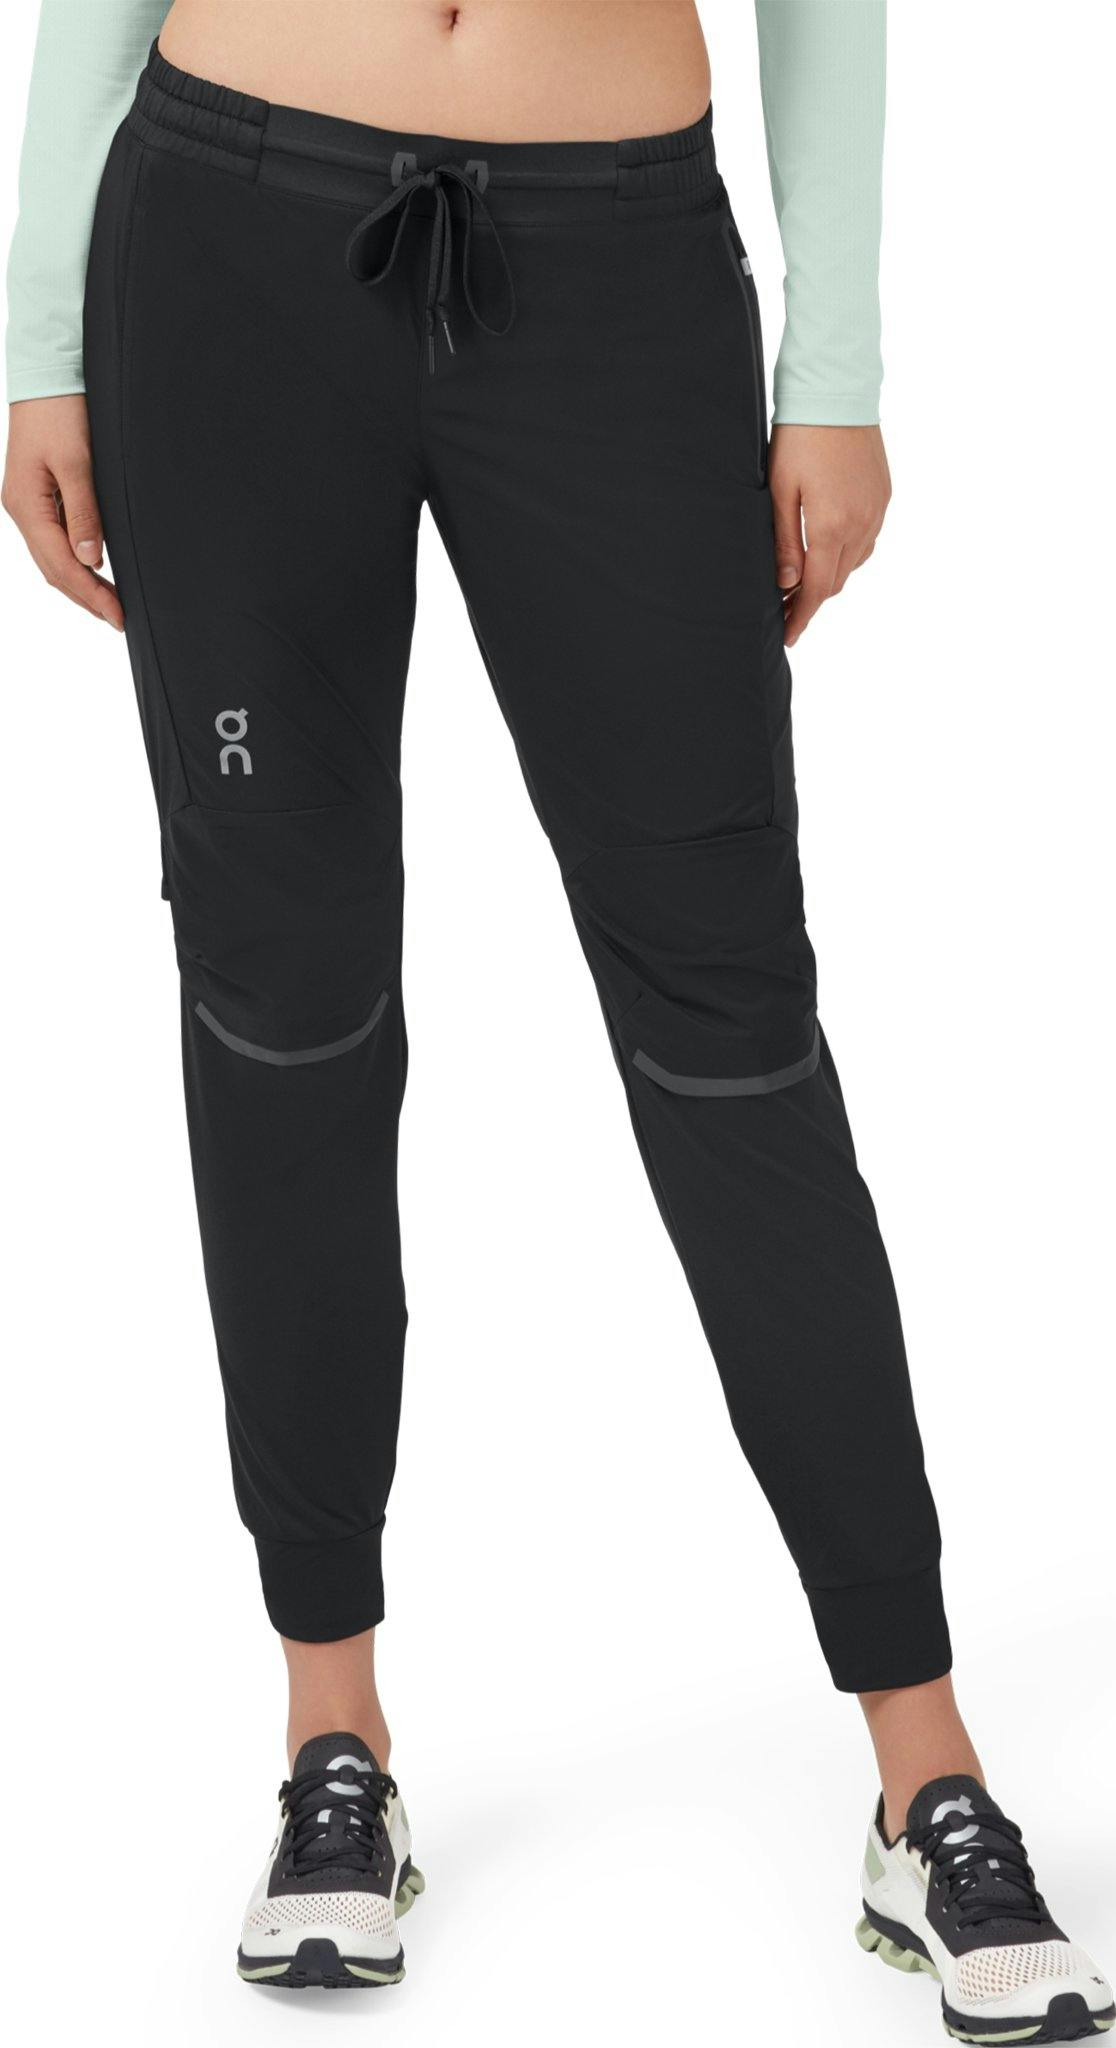 Product image for Running Pants - Women's